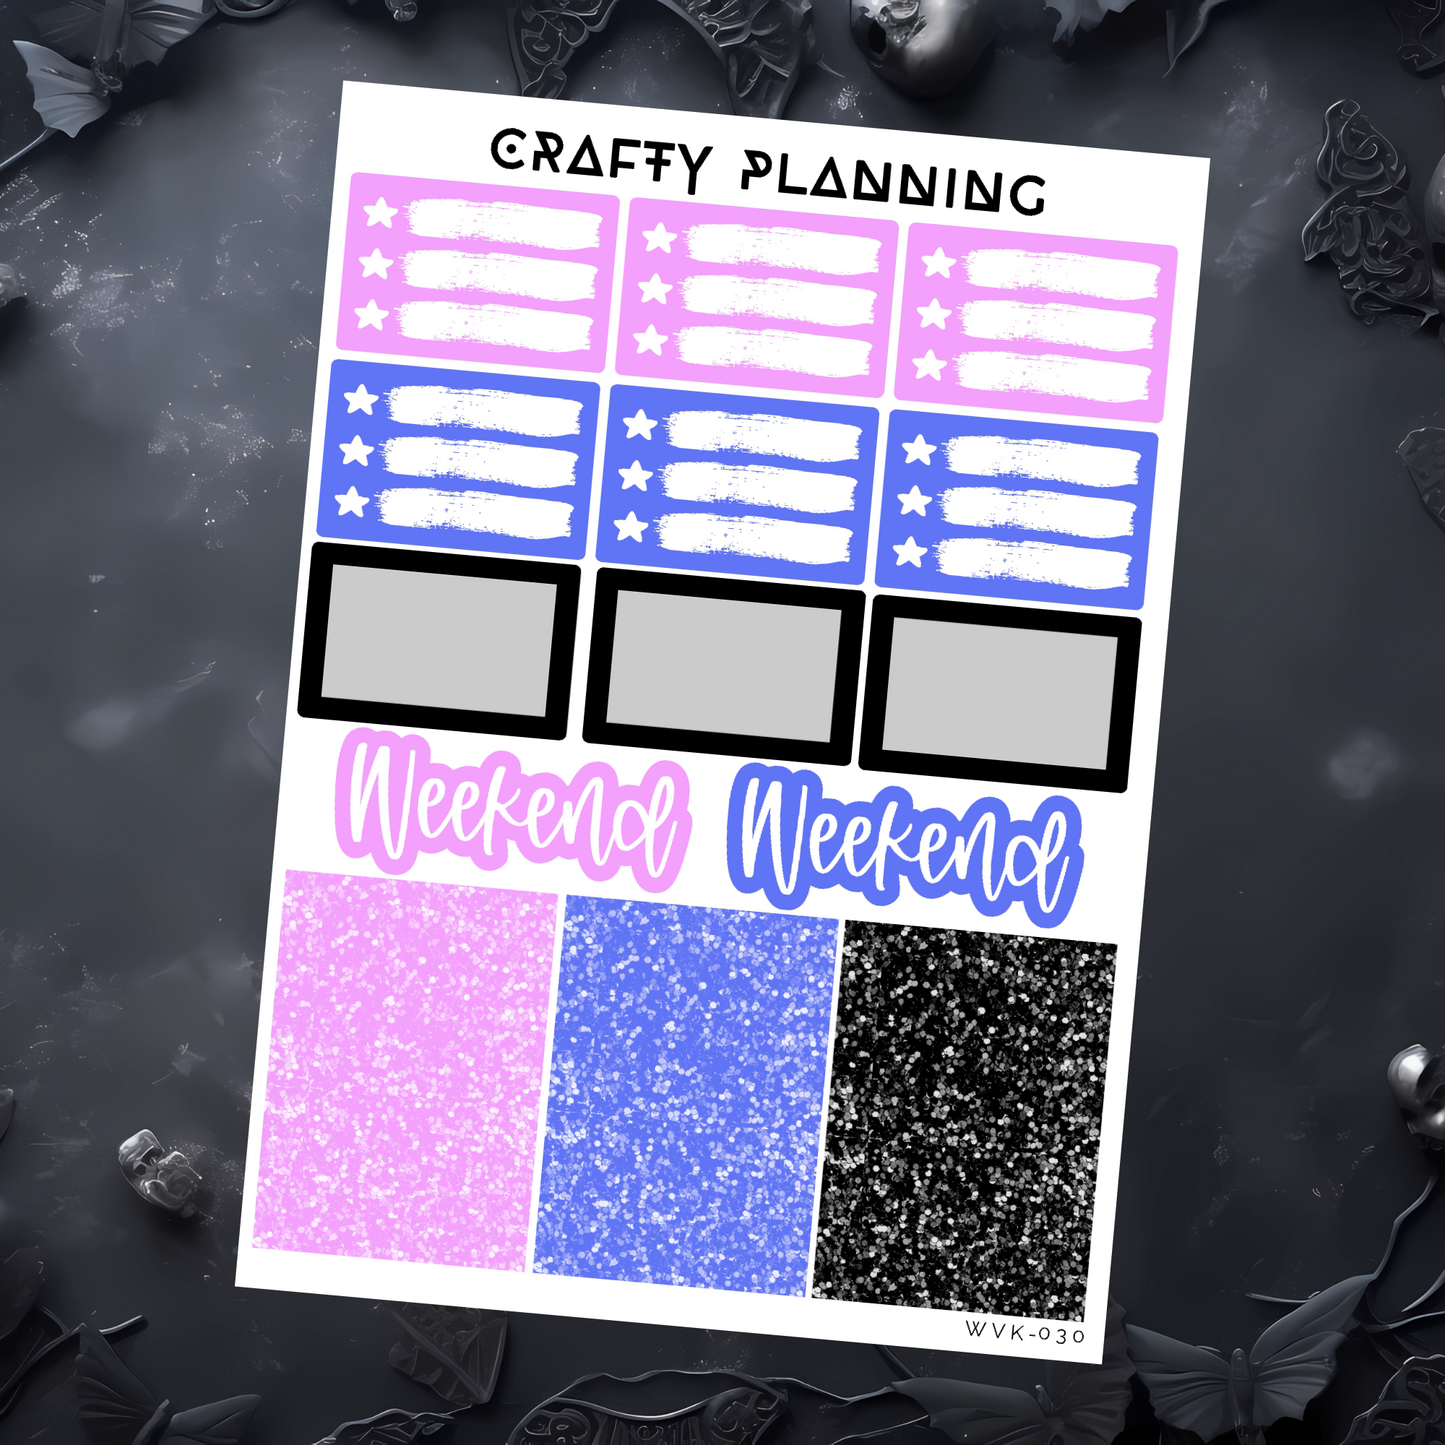 A Little Magic - Weekly Vertical Planner Kit